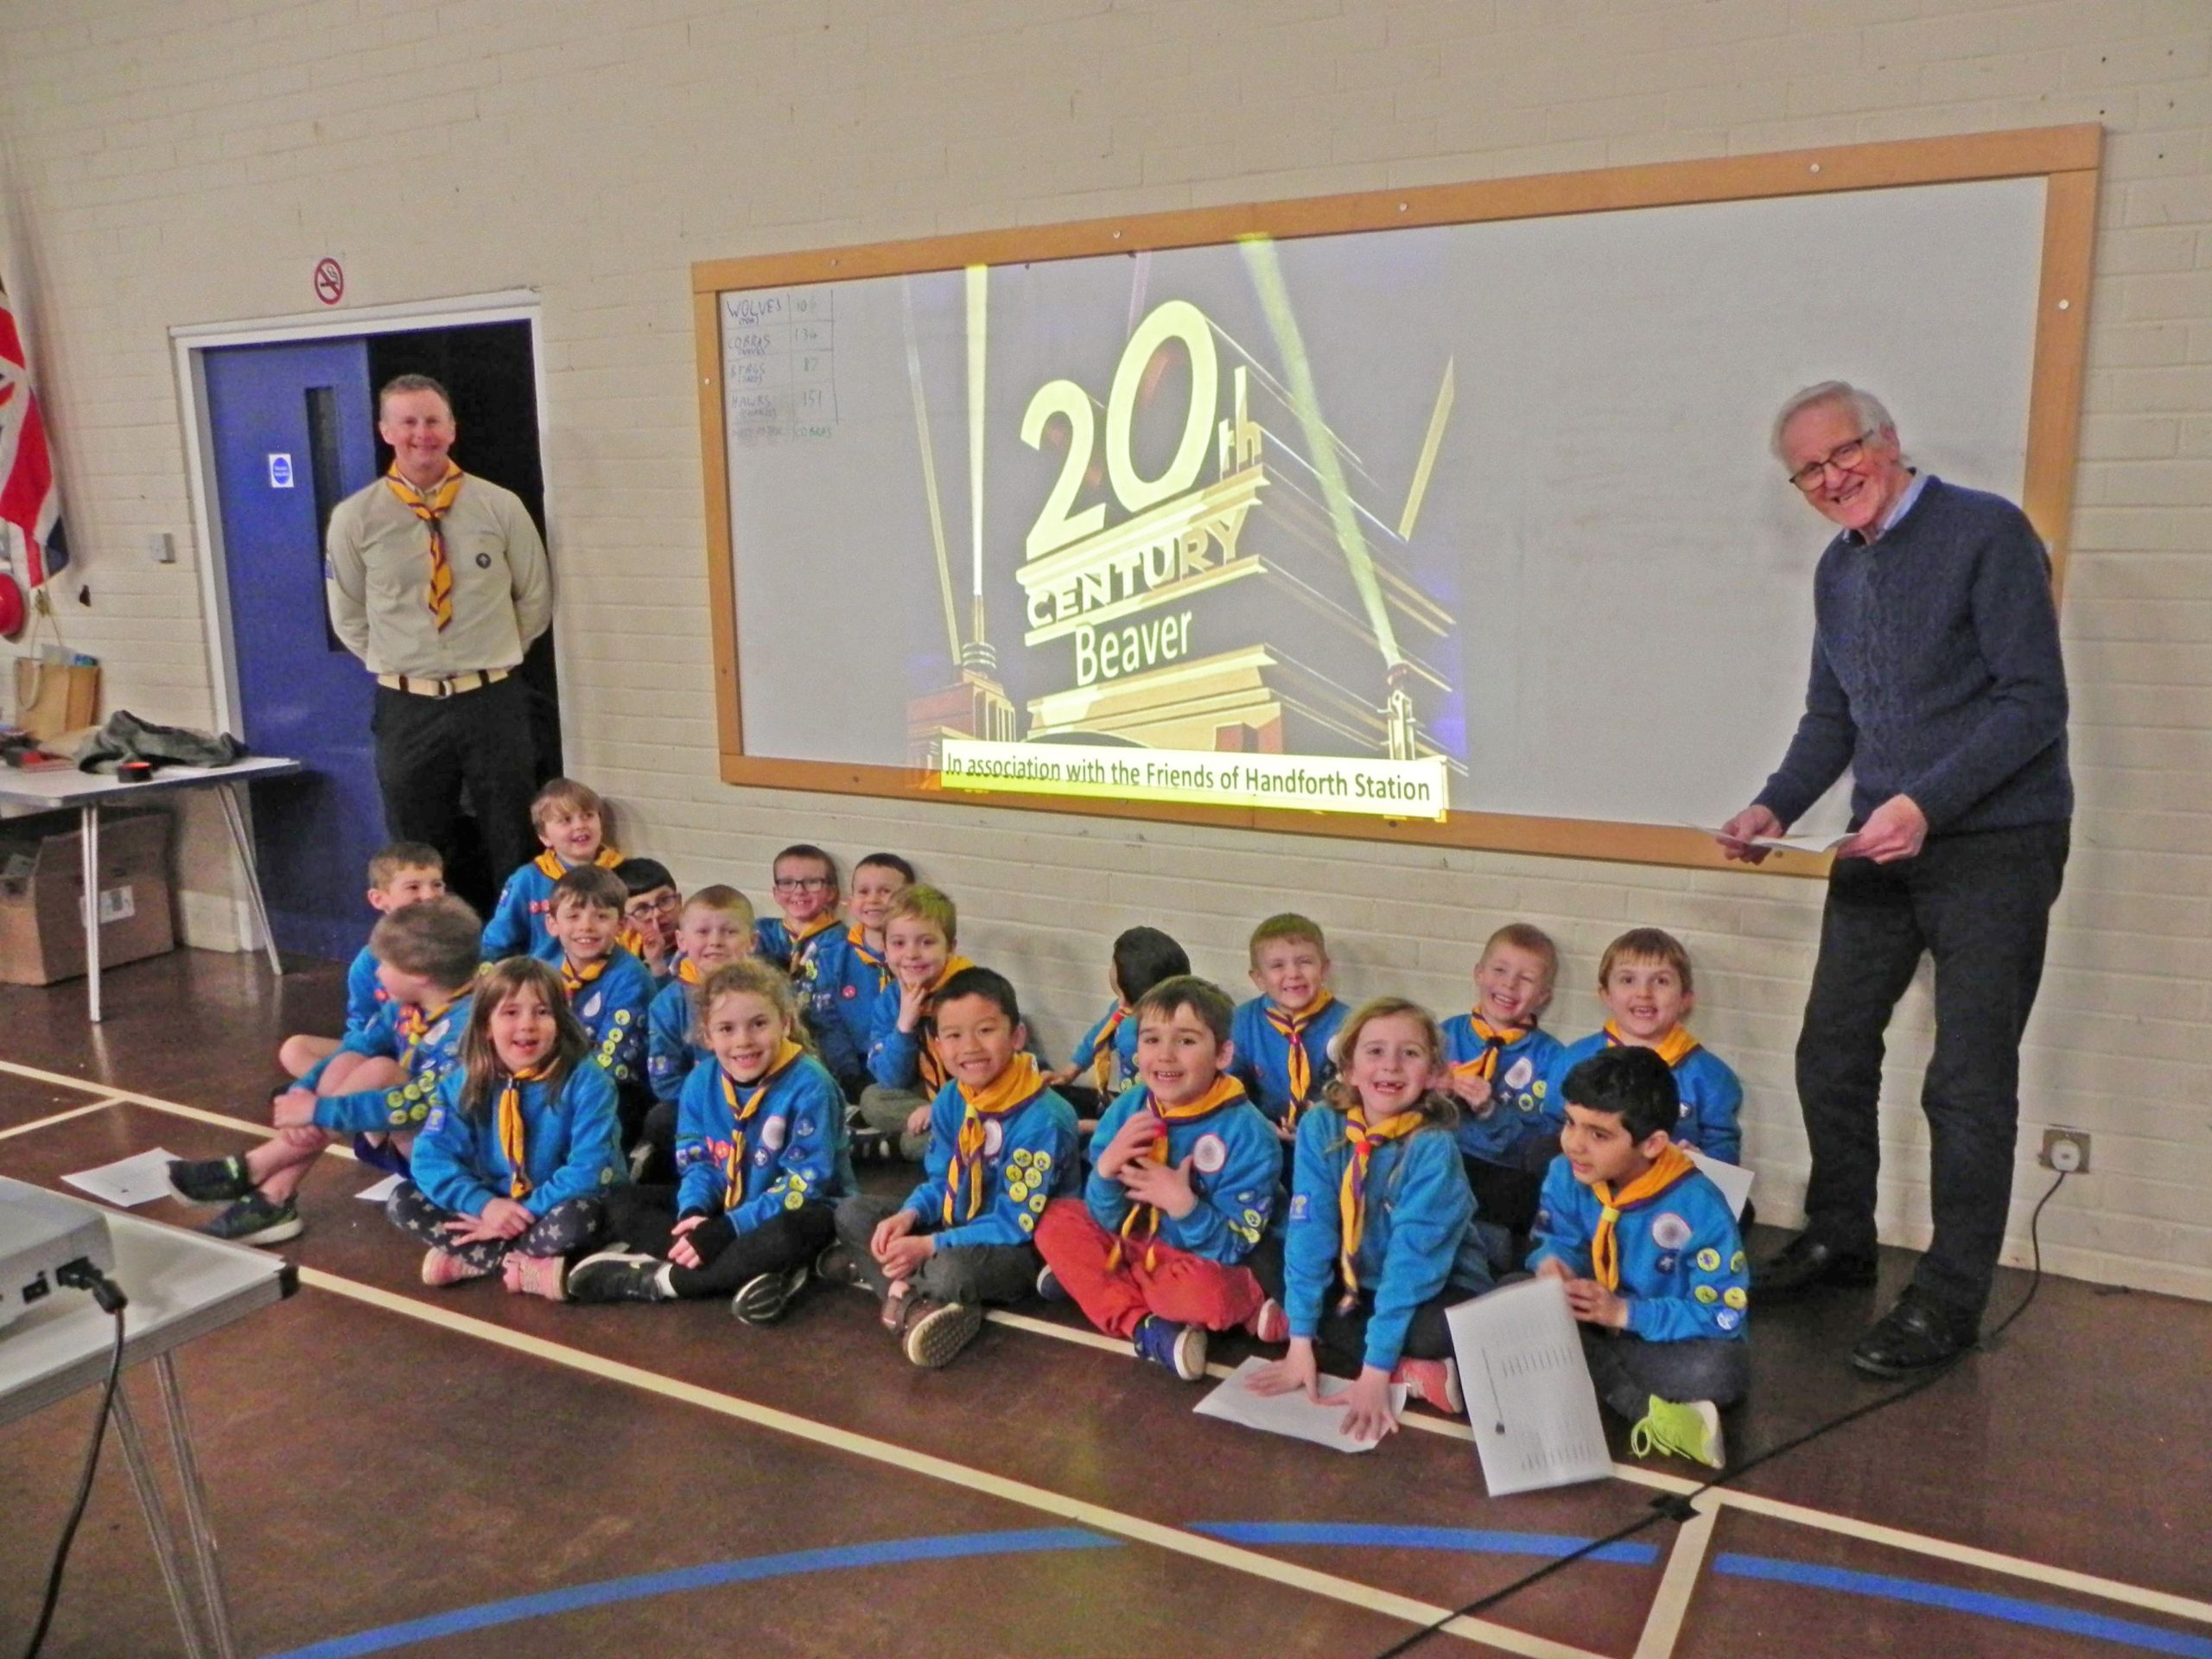 Handforth Beavers quizzed by the Friends of Handforth Station